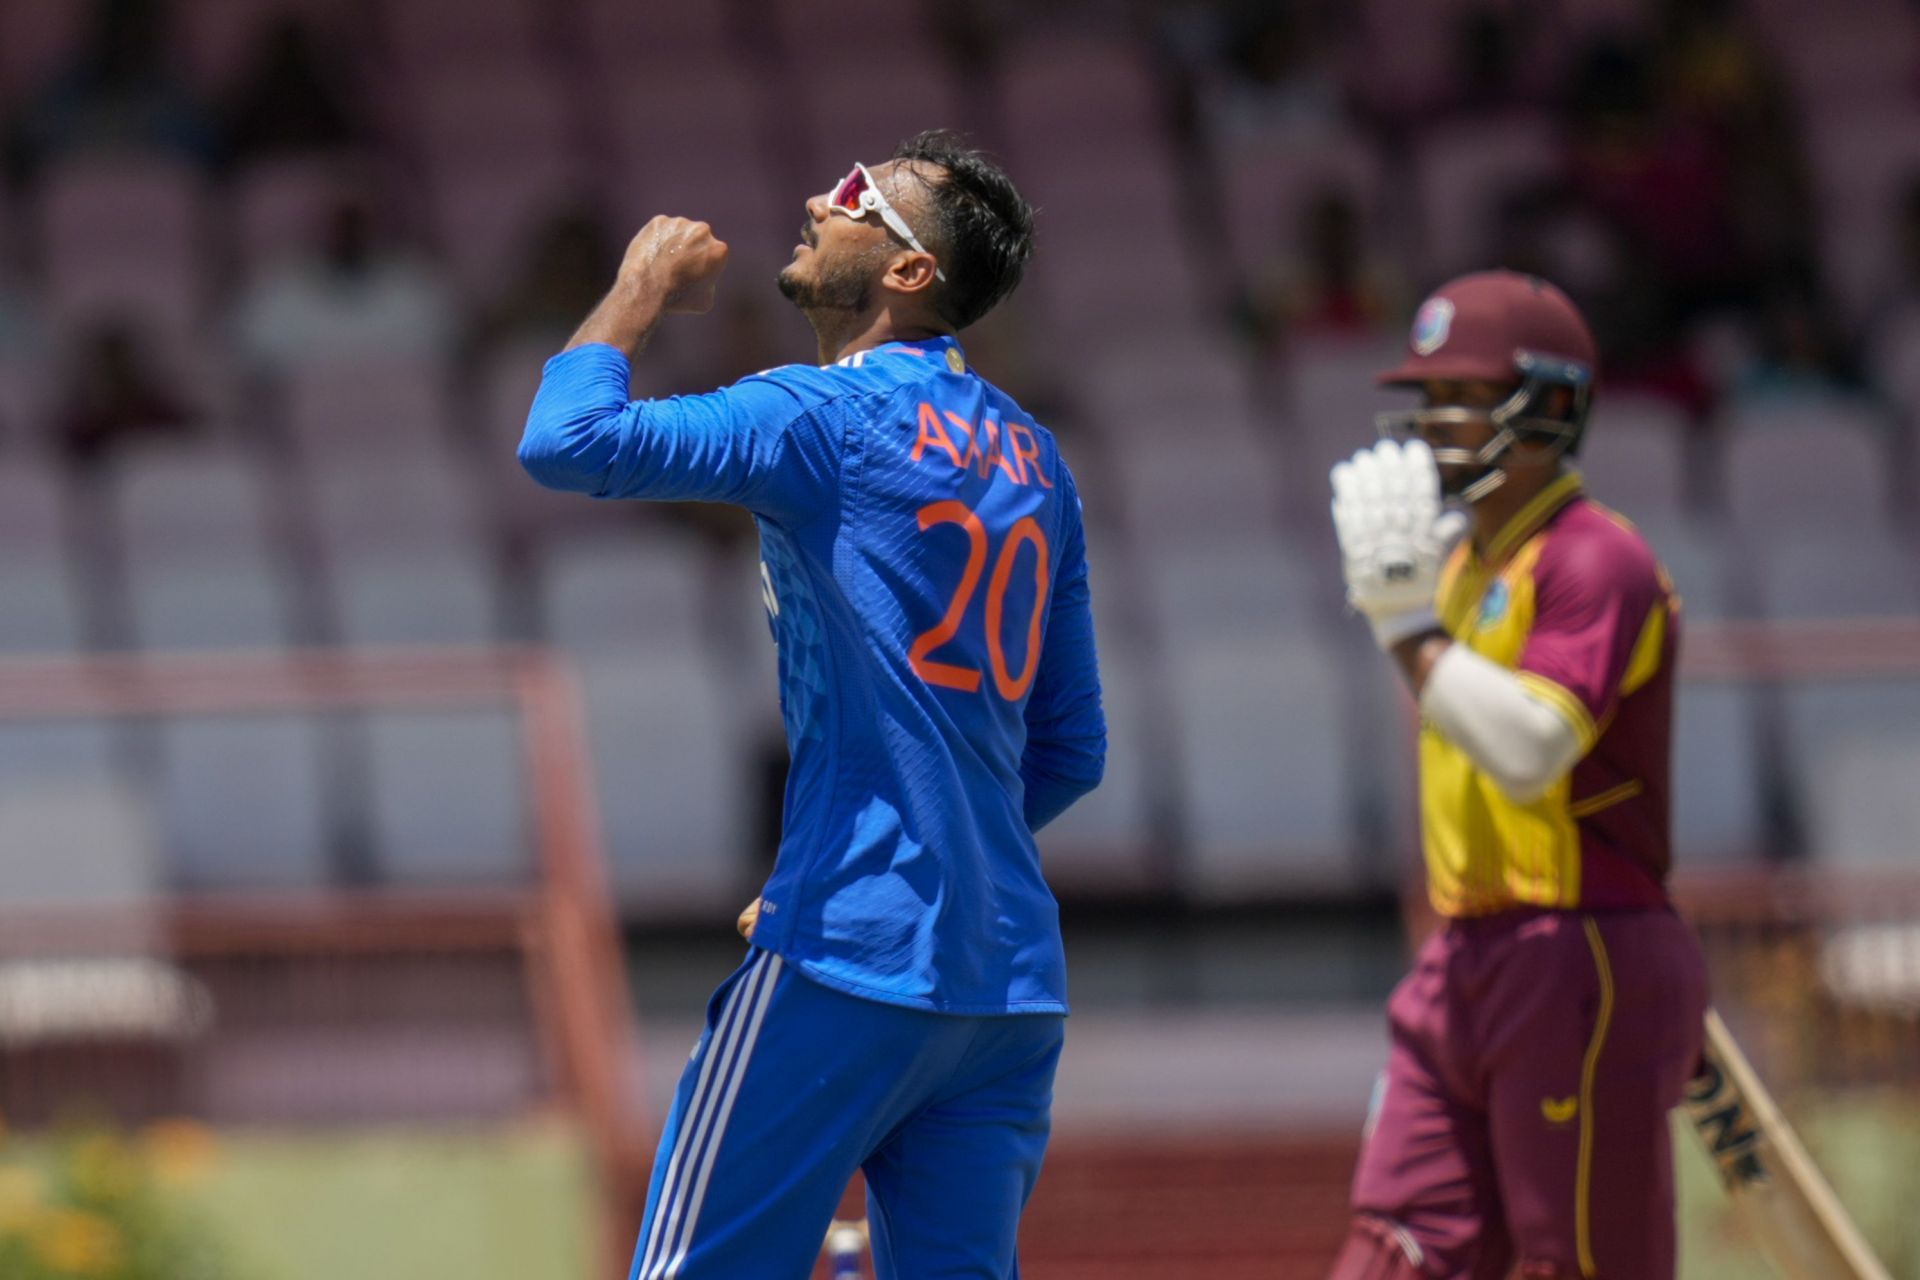 Axar Patel was carted around the ground in the powerplay